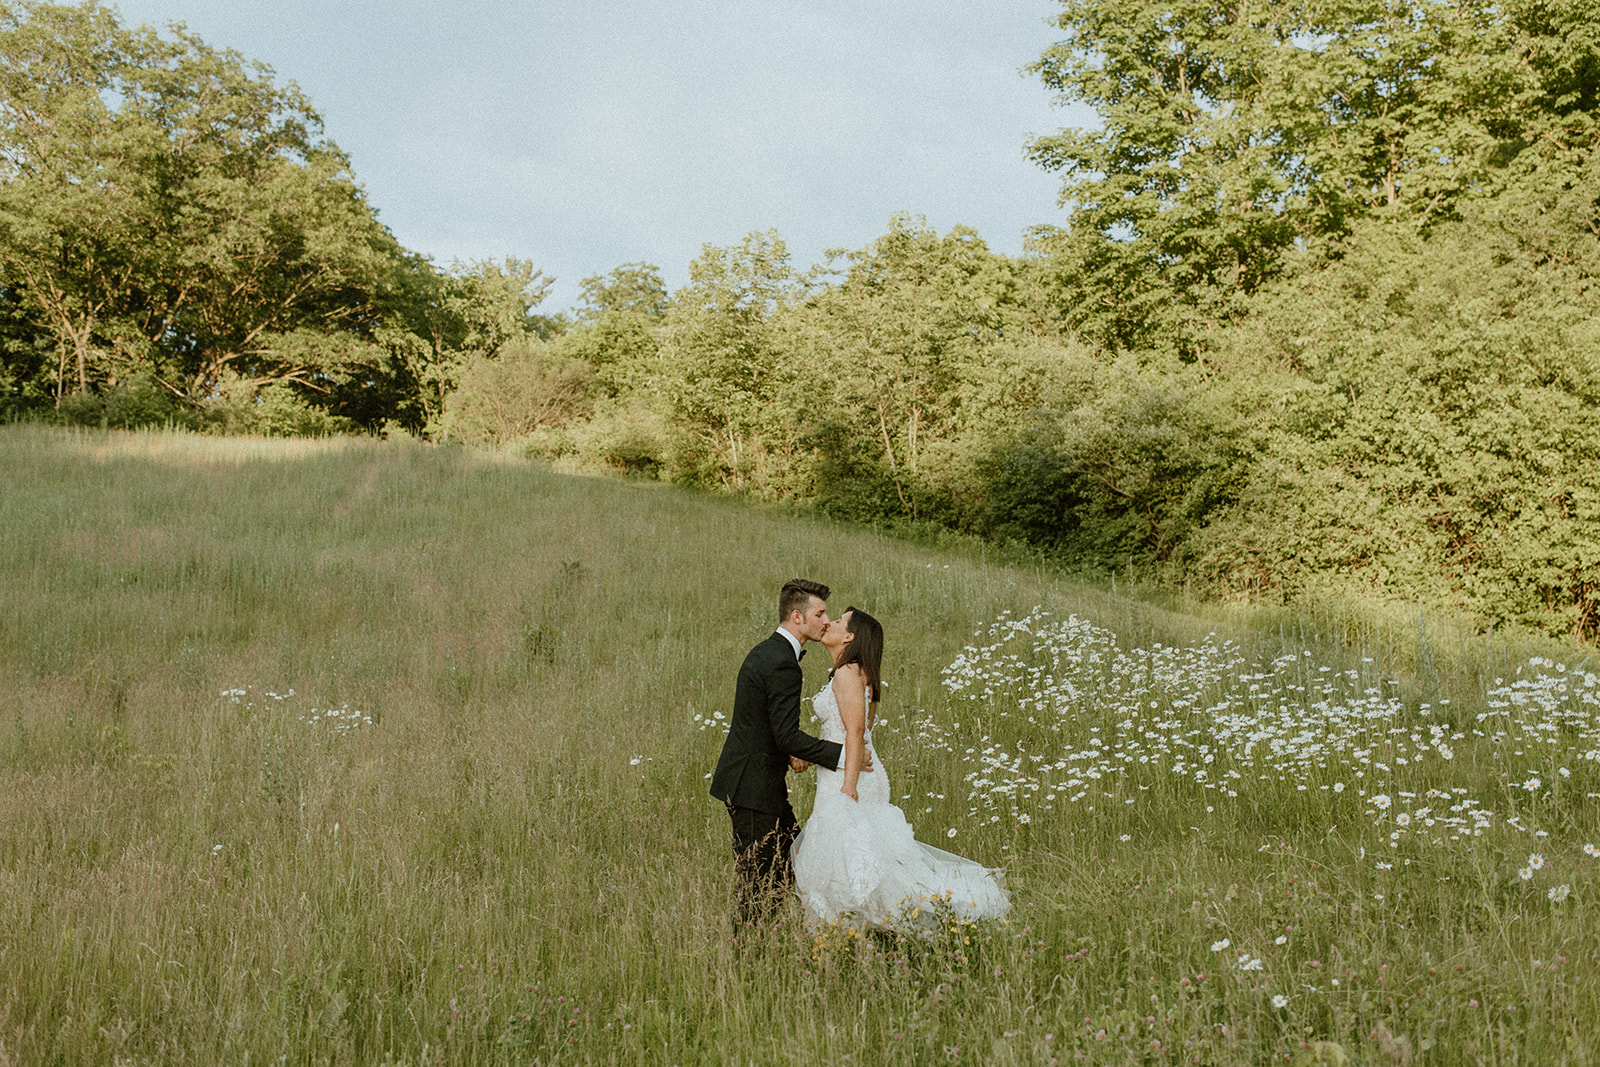 Emma Coss Wedding Photography Portrait of Bride and Groom Kissing in a field